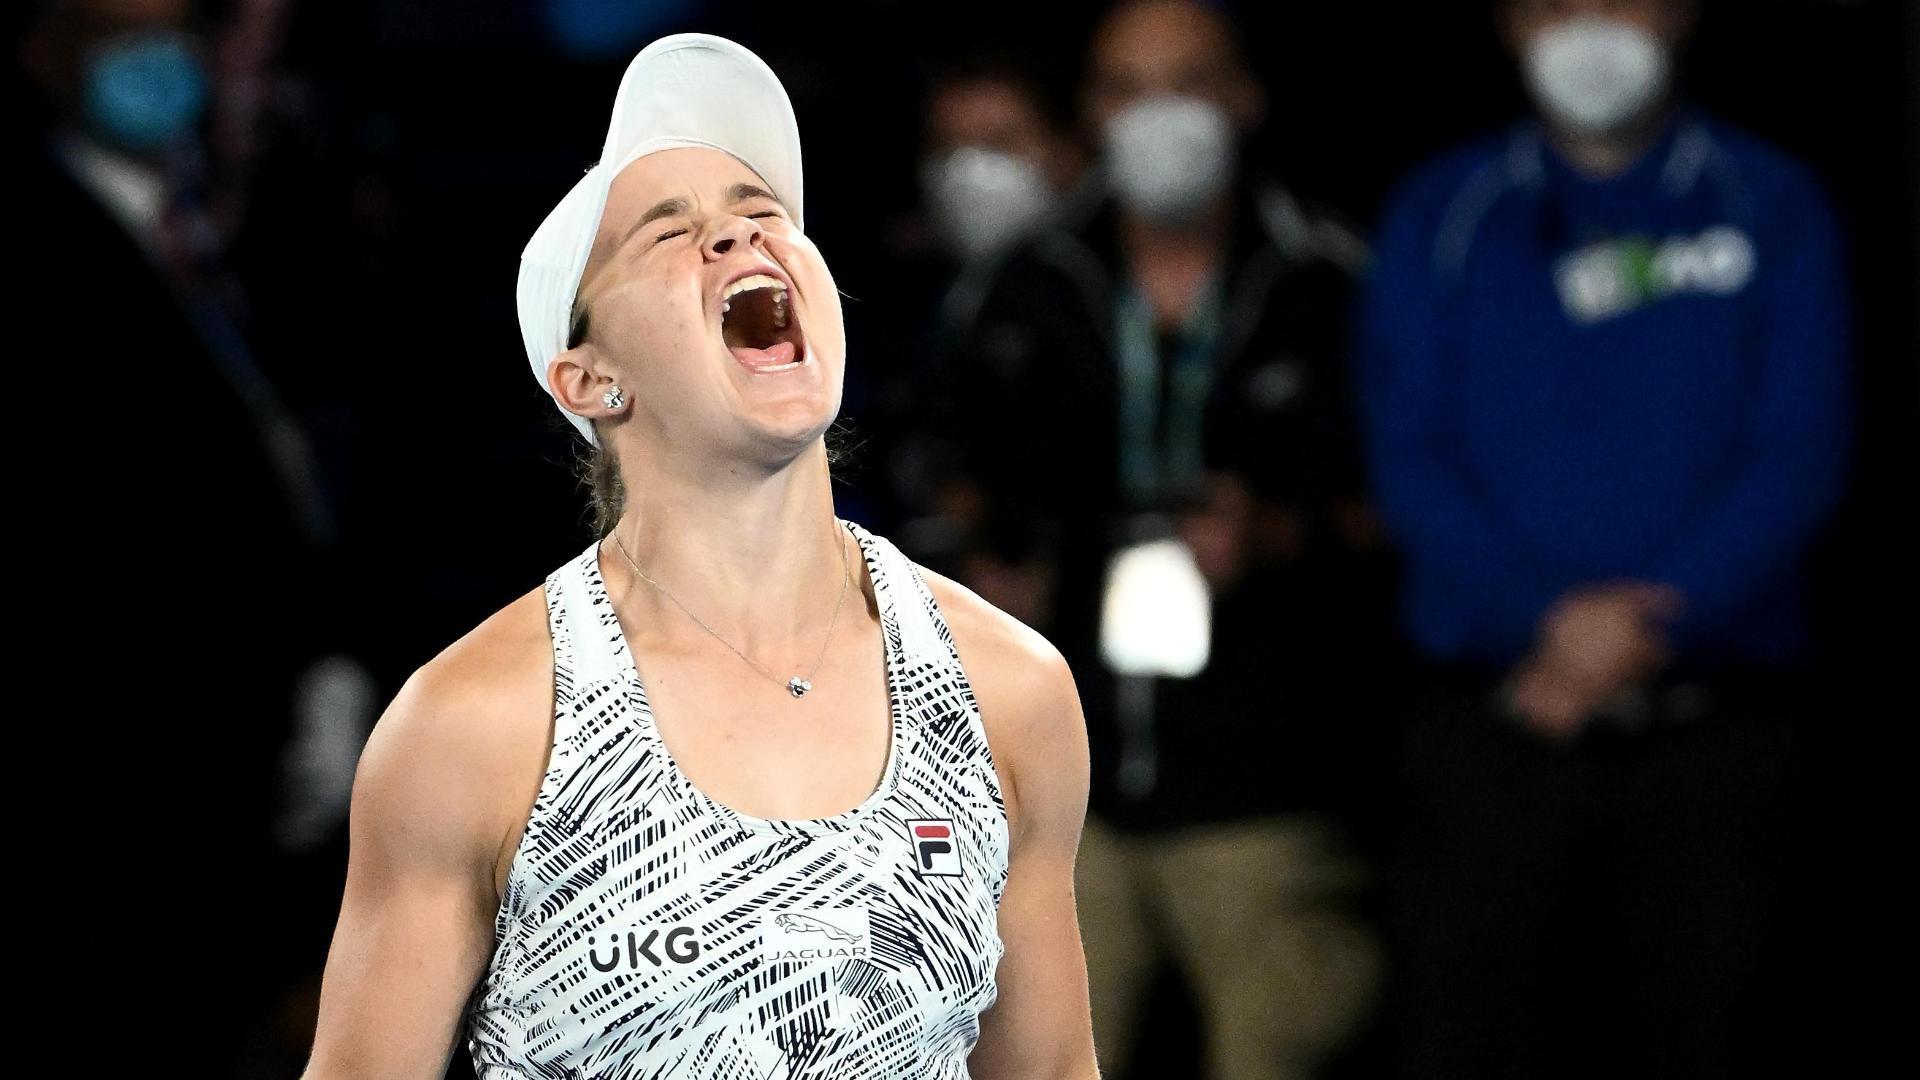 The moment Barty became Australian Open champion - Stream the Video